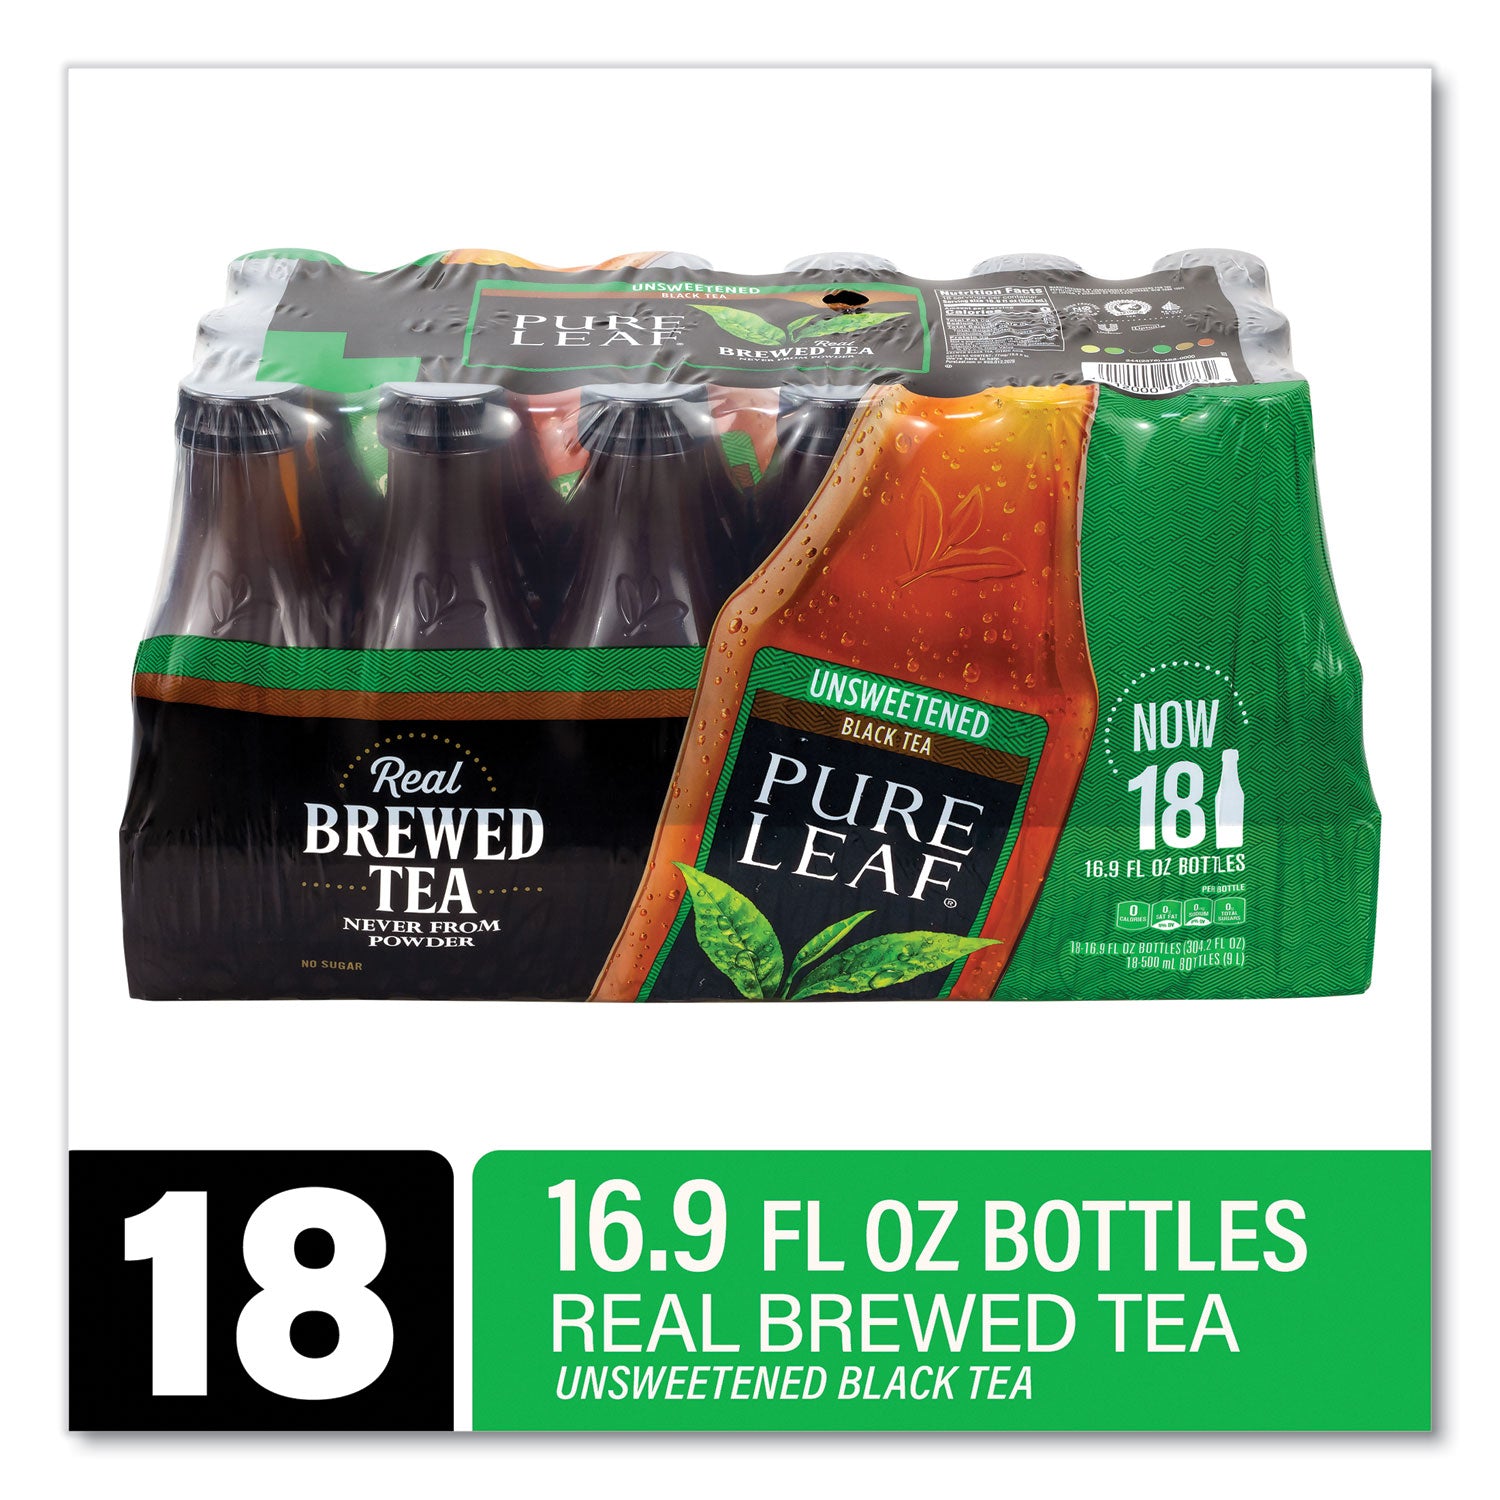 pure-leaf-unsweetened-iced-black-tea-169-oz-bottle-18-carton-ships-in-1-3-business-days_grr22002027 - 2